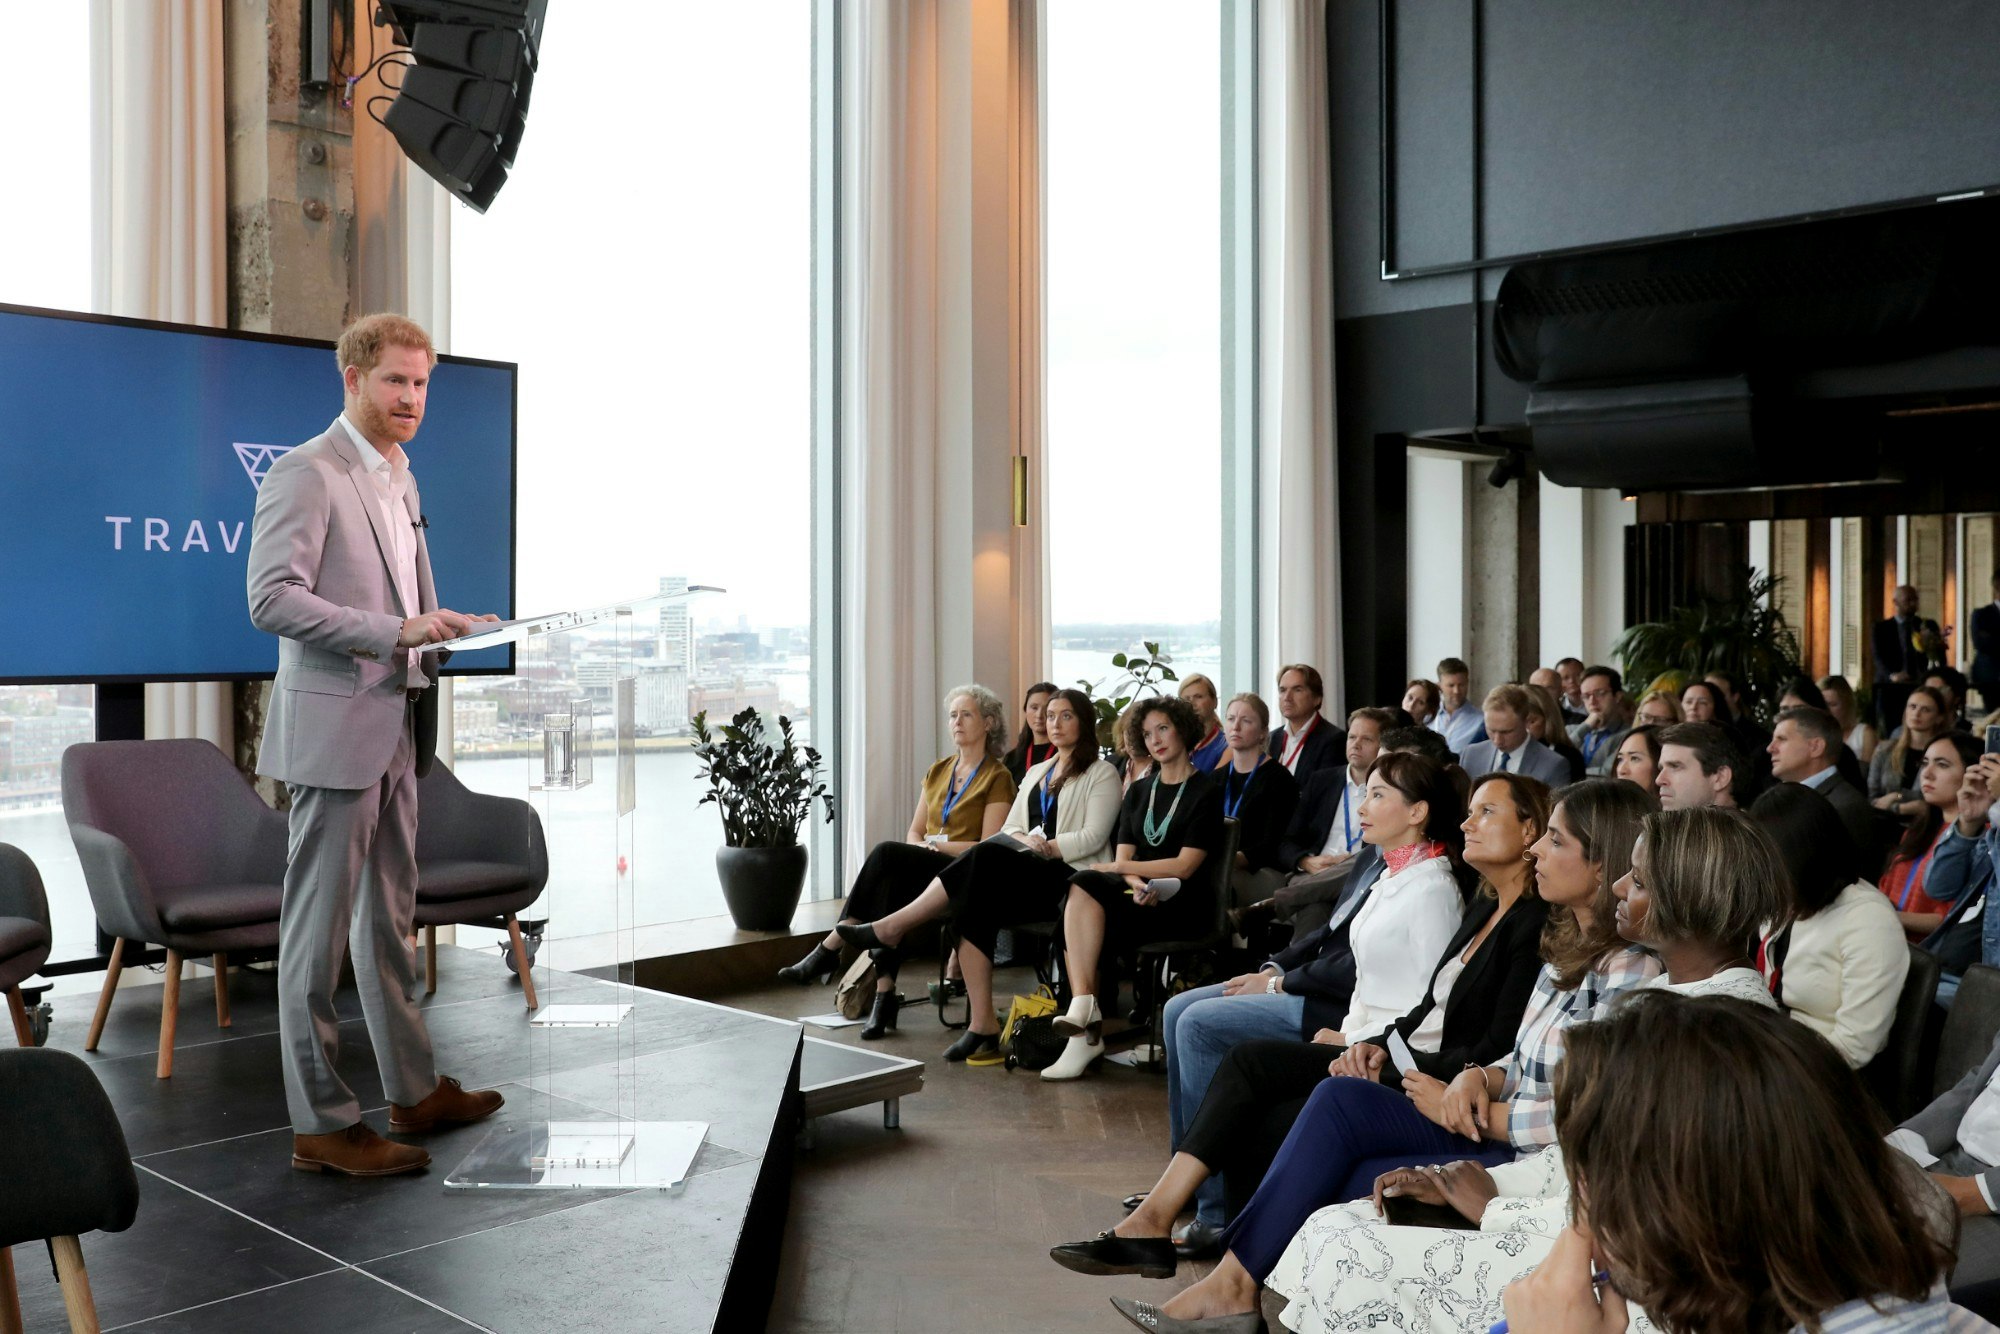 Prince Harry at the launch of Travalyst in Amsterdam